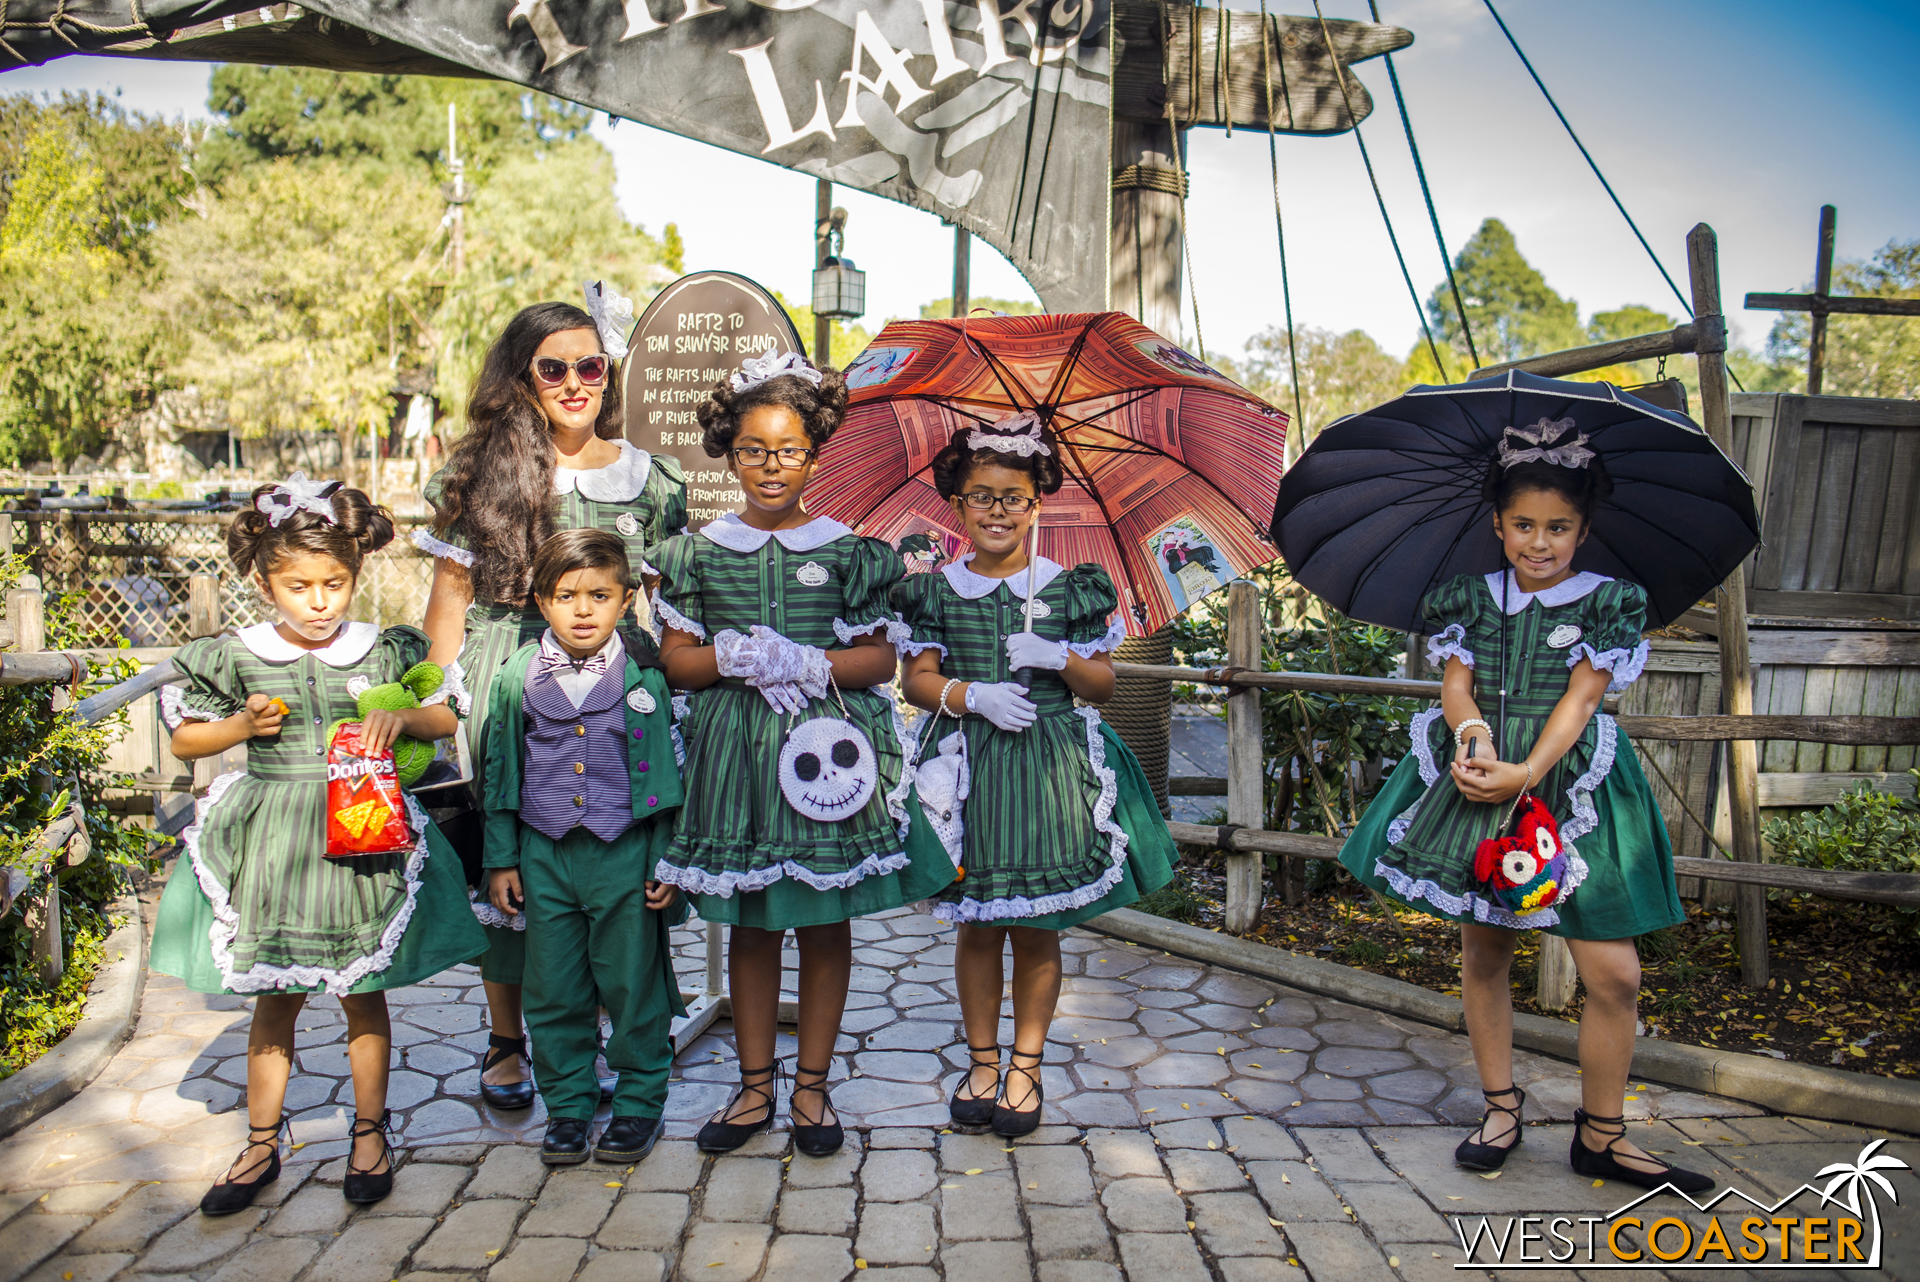  This family of Haunted Mansion hostesses and host were absolutely adorable. 